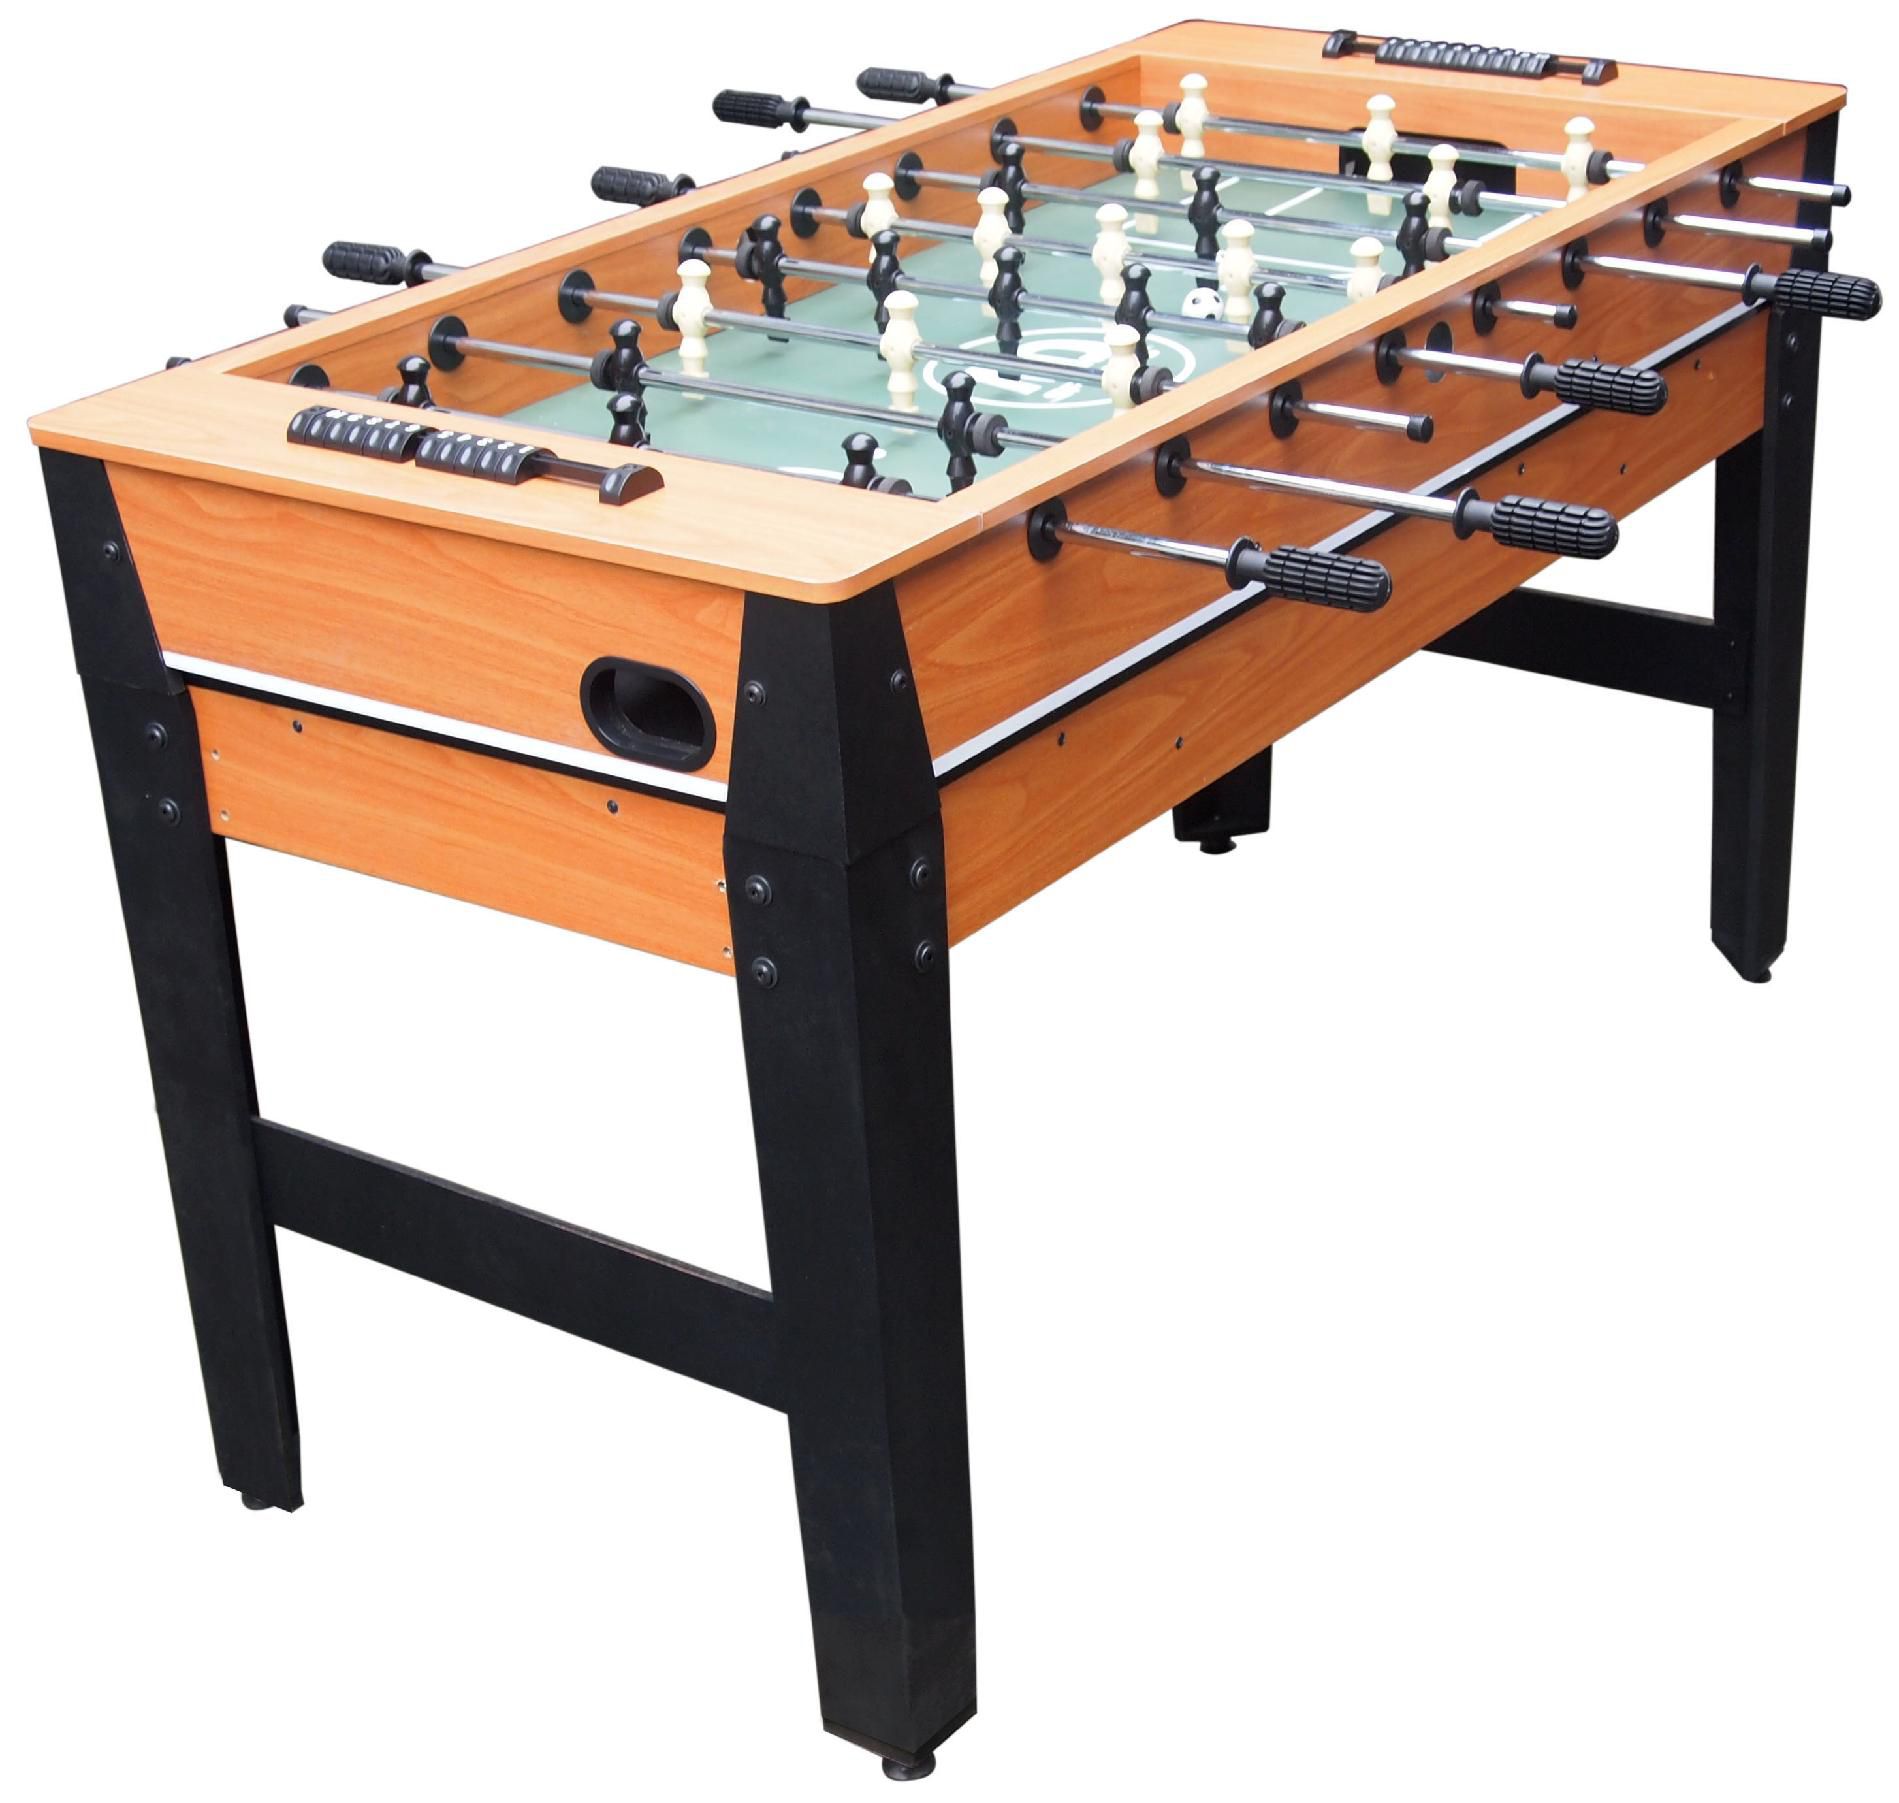 MD Sports 54in Multi Game Table | Shop Your Way: Online ...